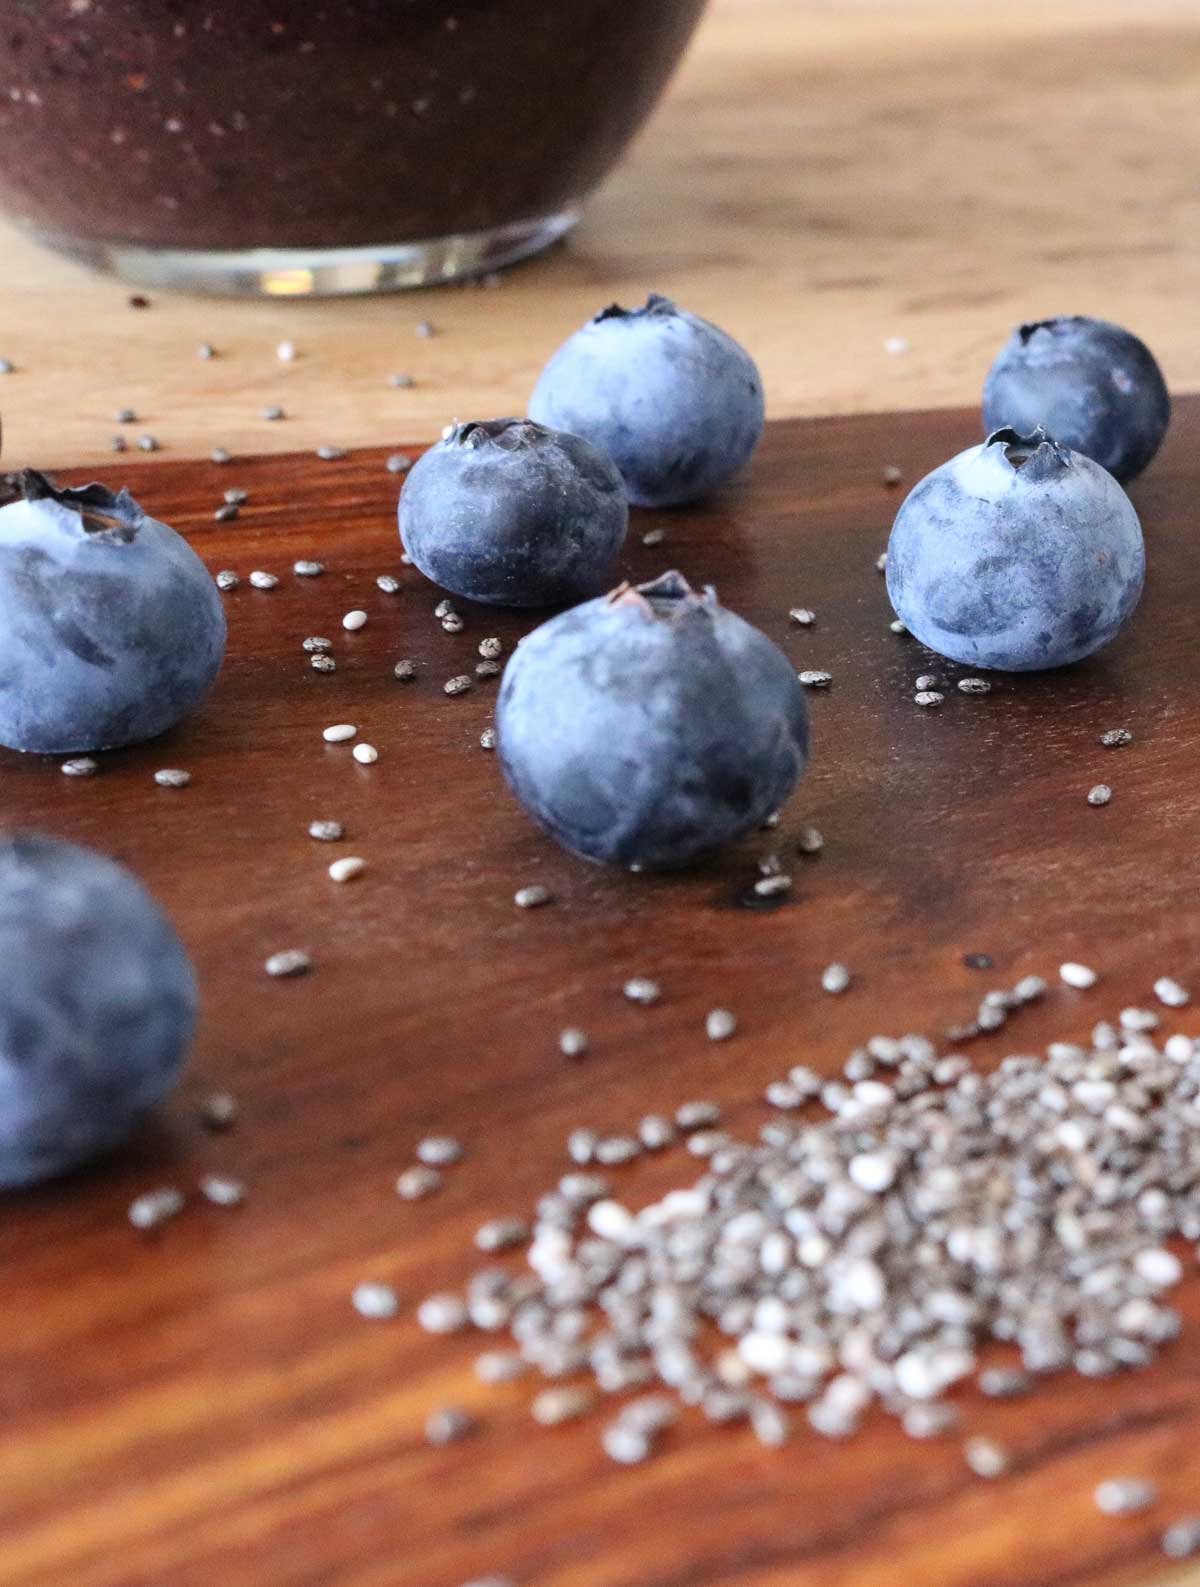 Fresh blueberries and chia seeds on a wooden board.